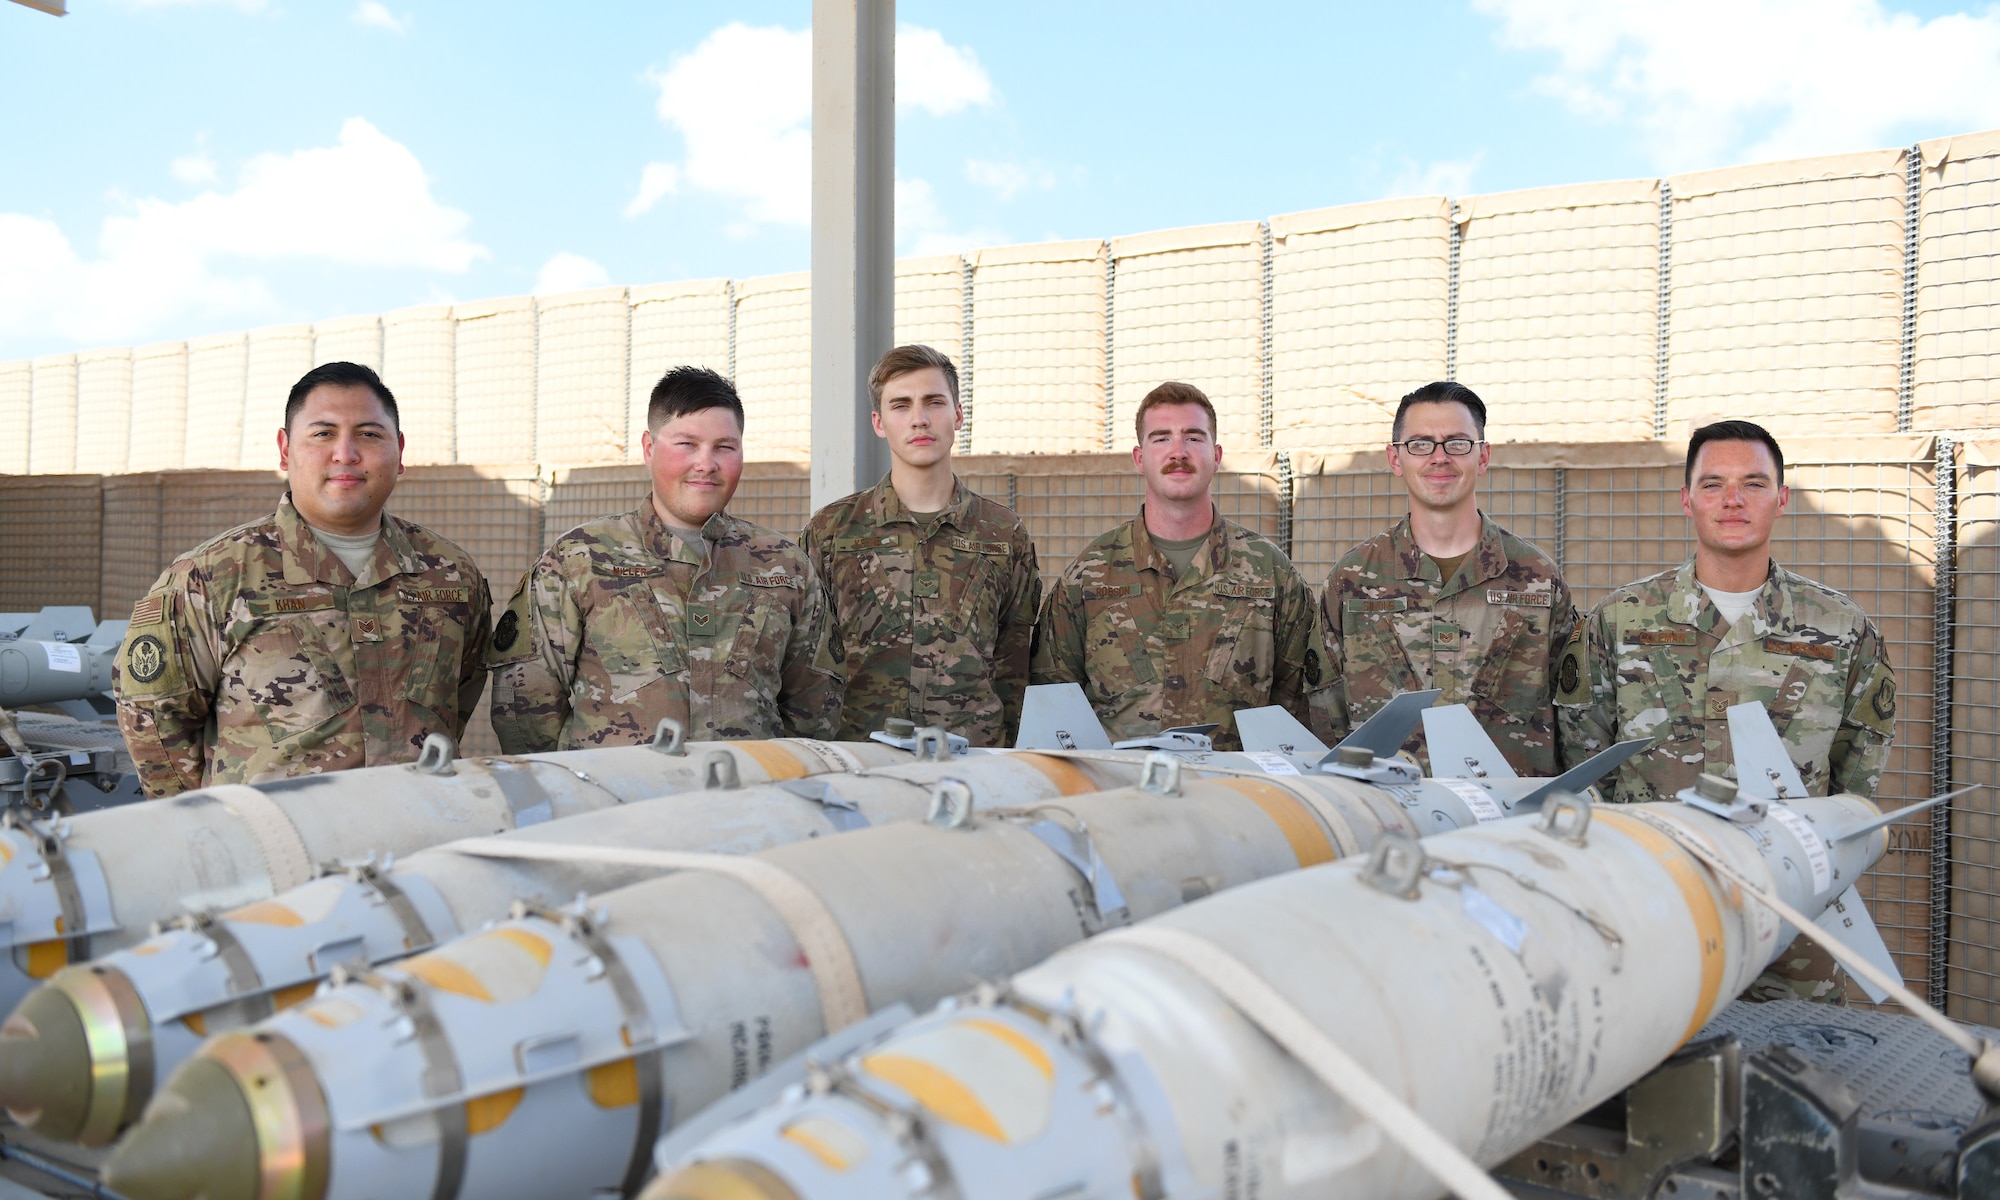 U.S. Air Force munitions Airmen assigned to the 726th Expeditionary Air Base Squadron pose for a photo after a bomb build at Chabelley Airfield, Djibouti, Nov. 12, 2019. The 726th EABS Munitions Systems Airmen build, inspect and store all munitions at the airfield, ensuring mission effectiveness at a moment’s notice. (U.S. Air Force photo by Staff Sgt. Alex Fox Echols III)